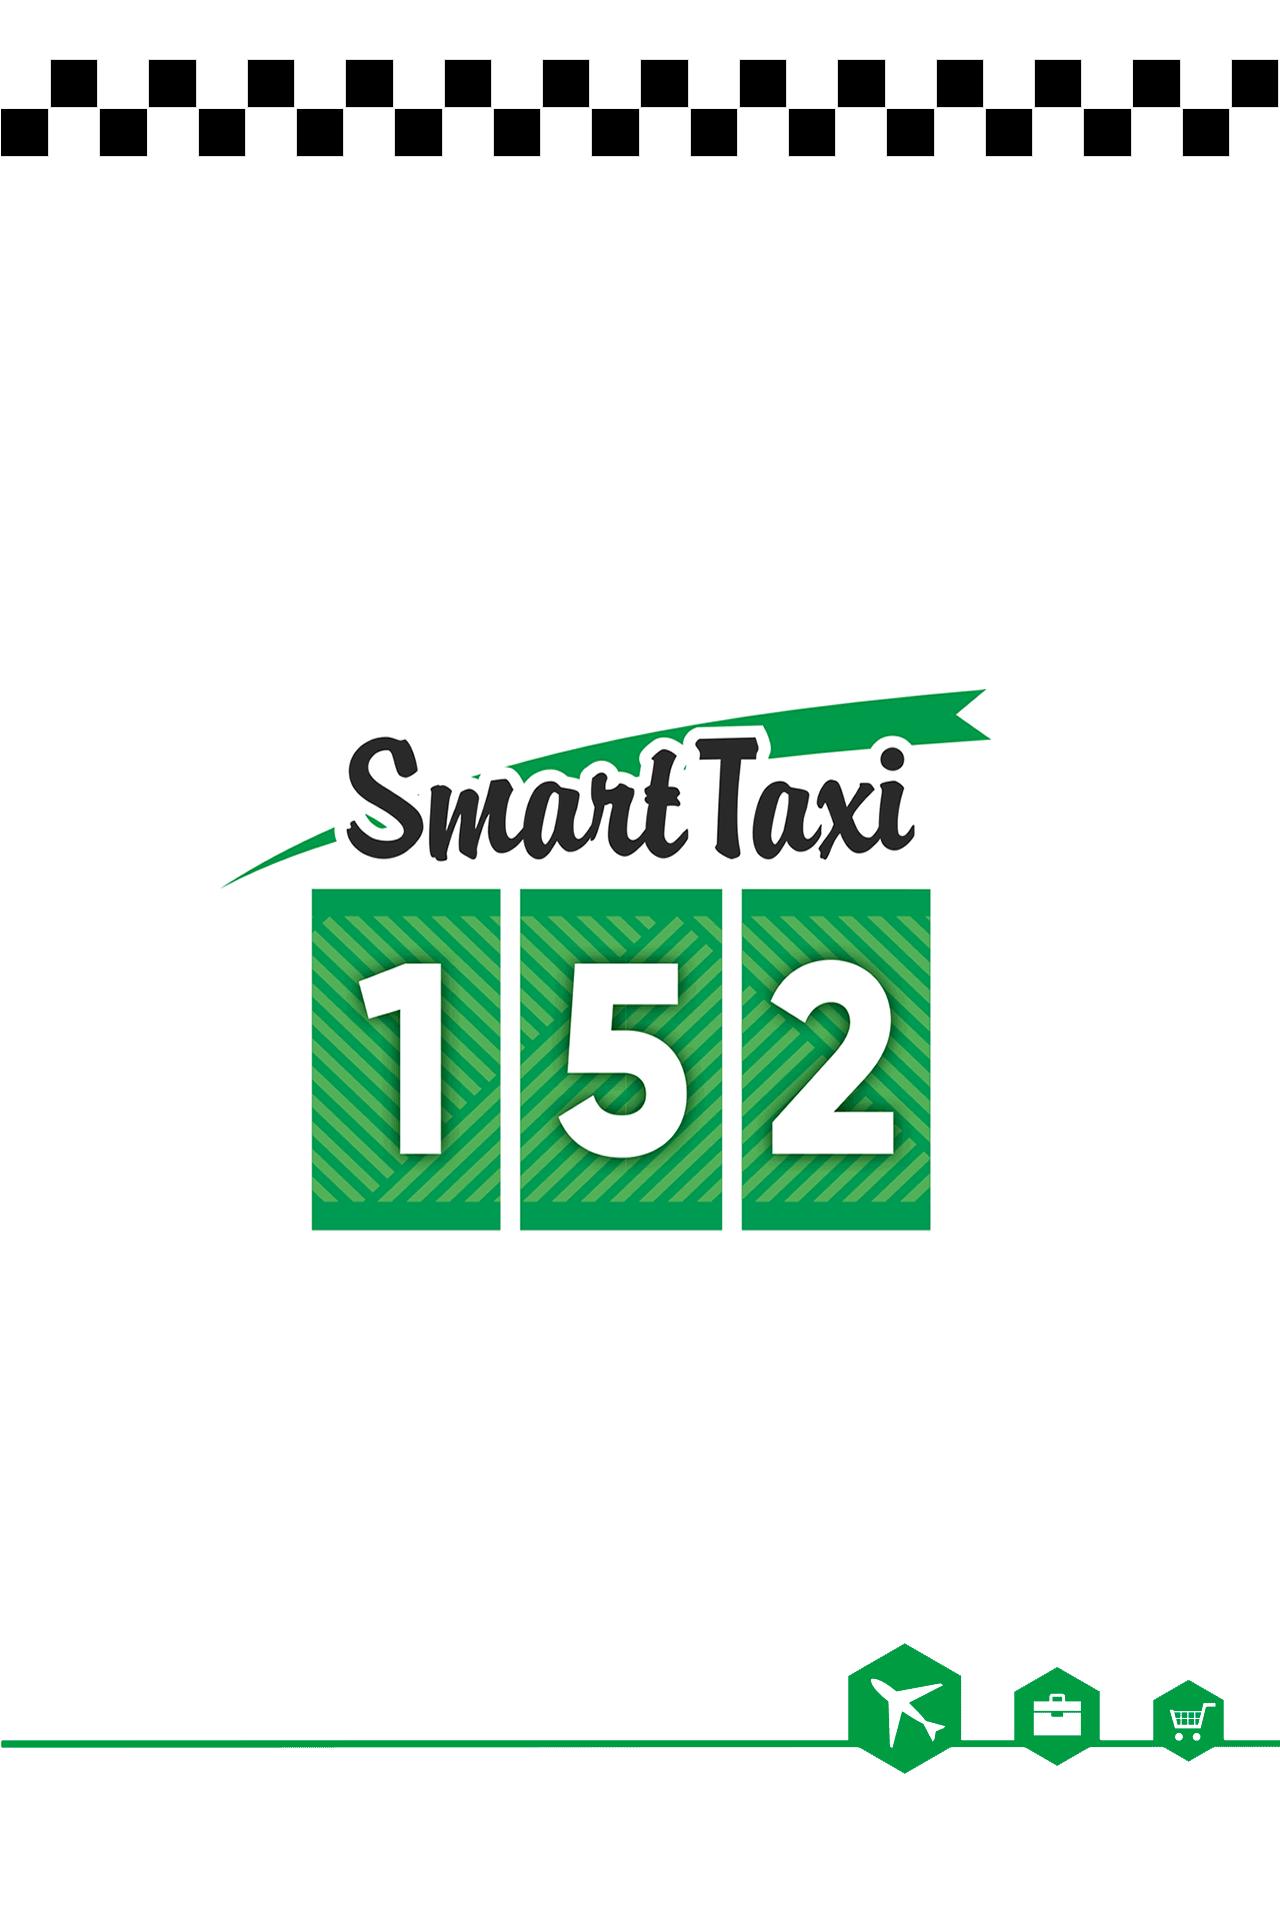 Smart Taxi online booking, Minsk for Android - APK Download